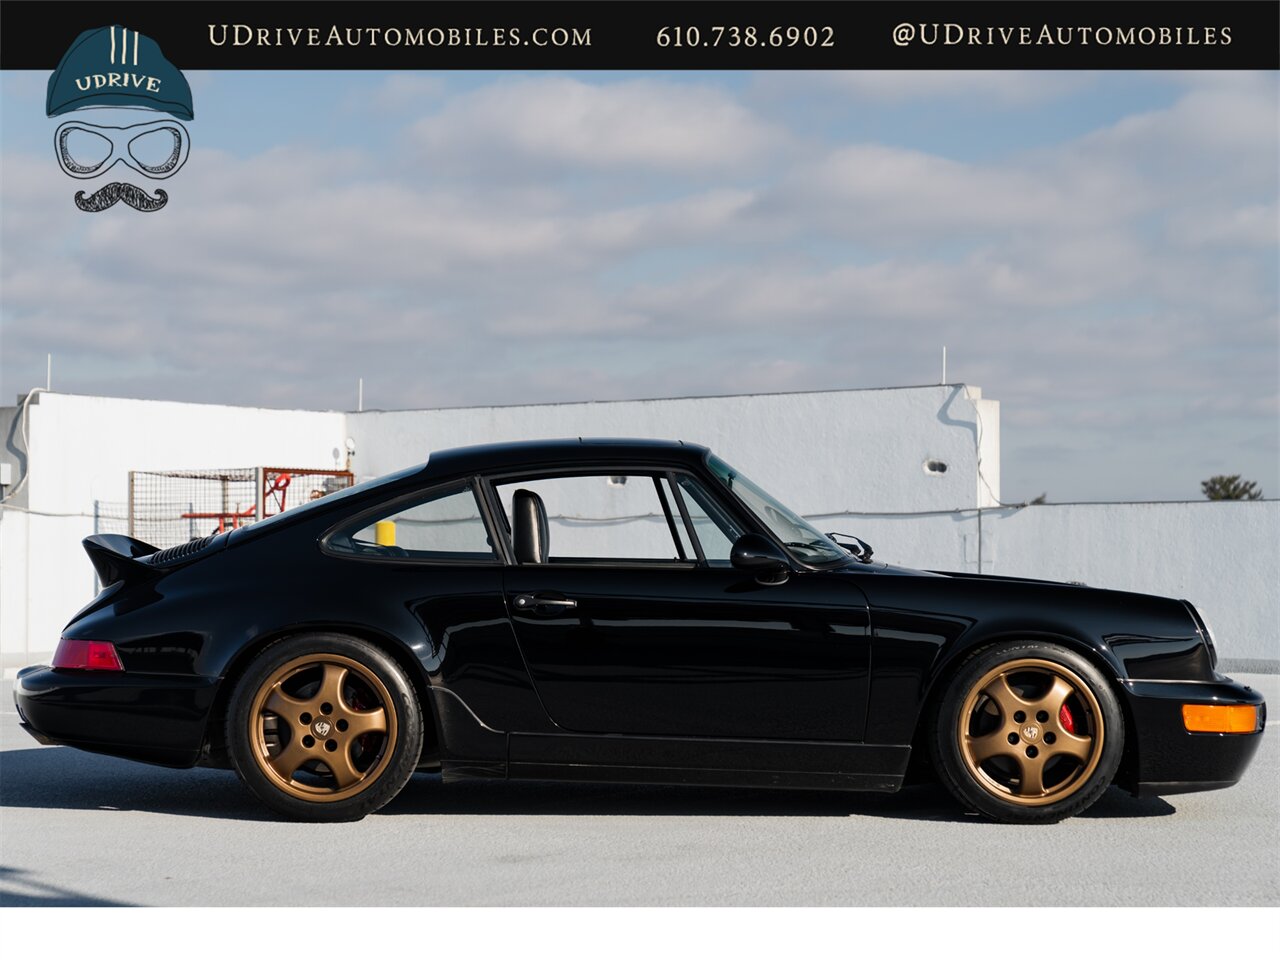 1989 Porsche 911 C4  964 Carrera 4 C4 5 Speed Manual $33k in Recent Service History - Photo 18 - West Chester, PA 19382